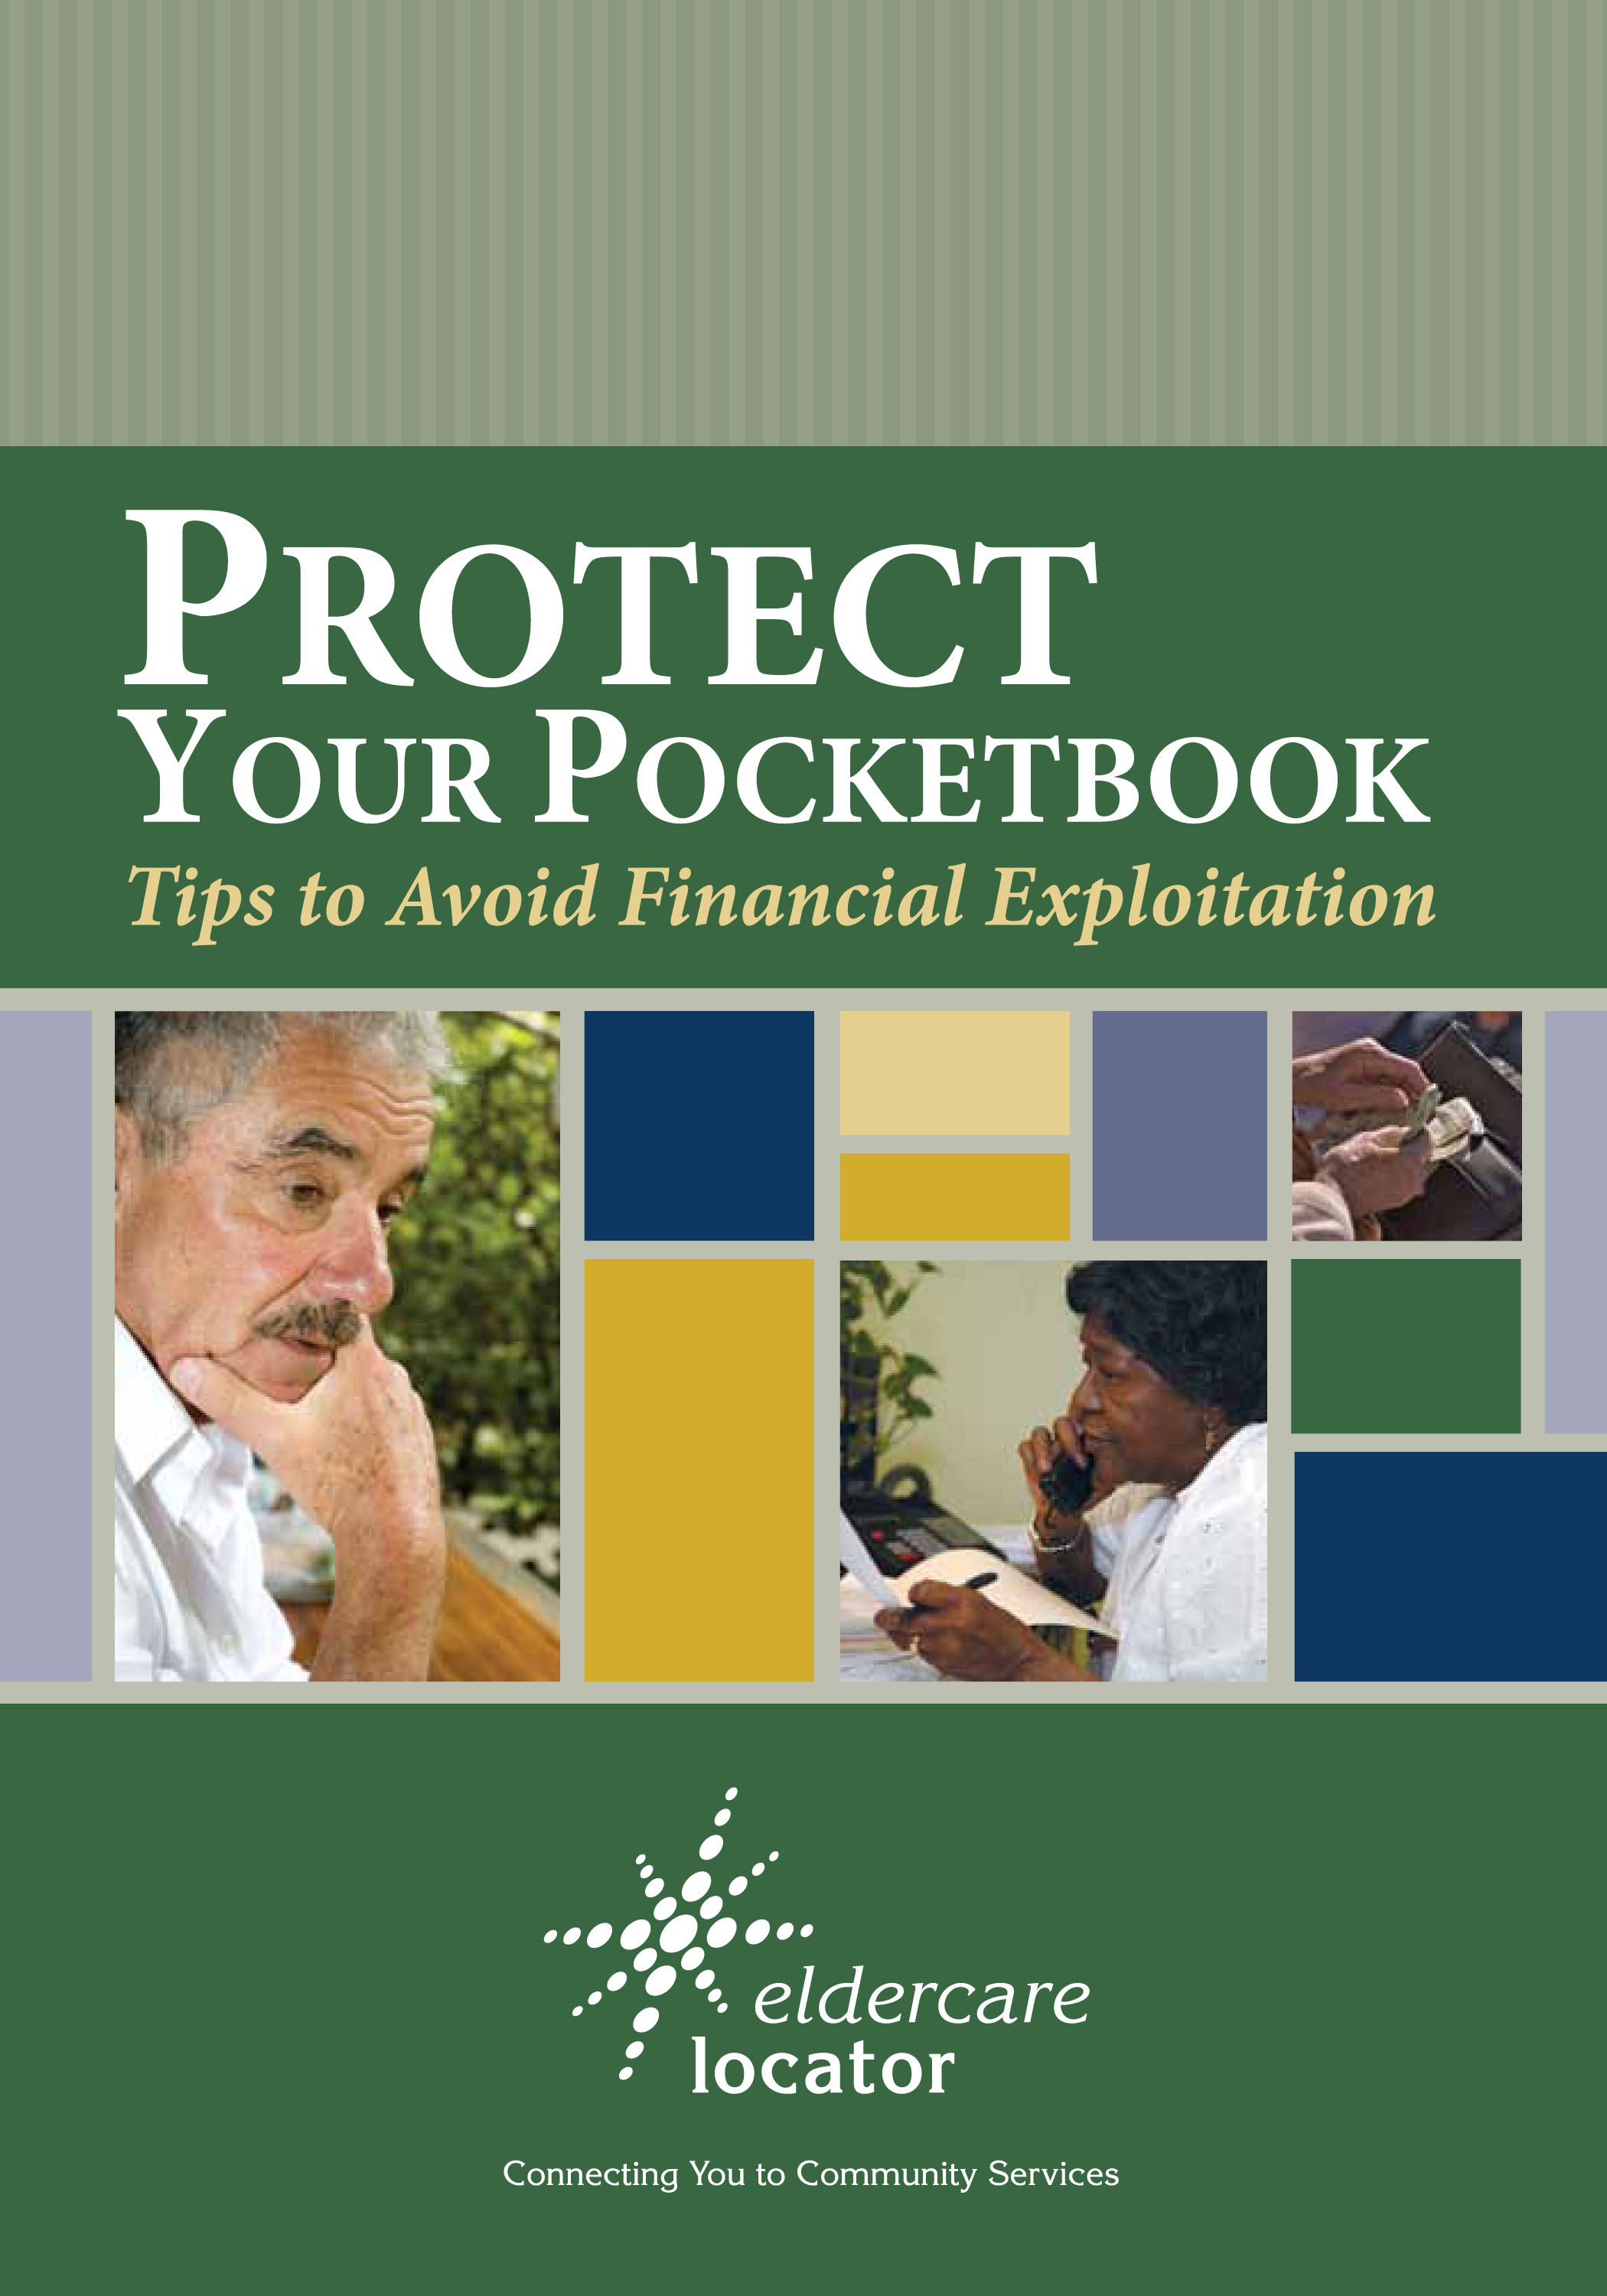 Protect Your Pocketbook Brochure